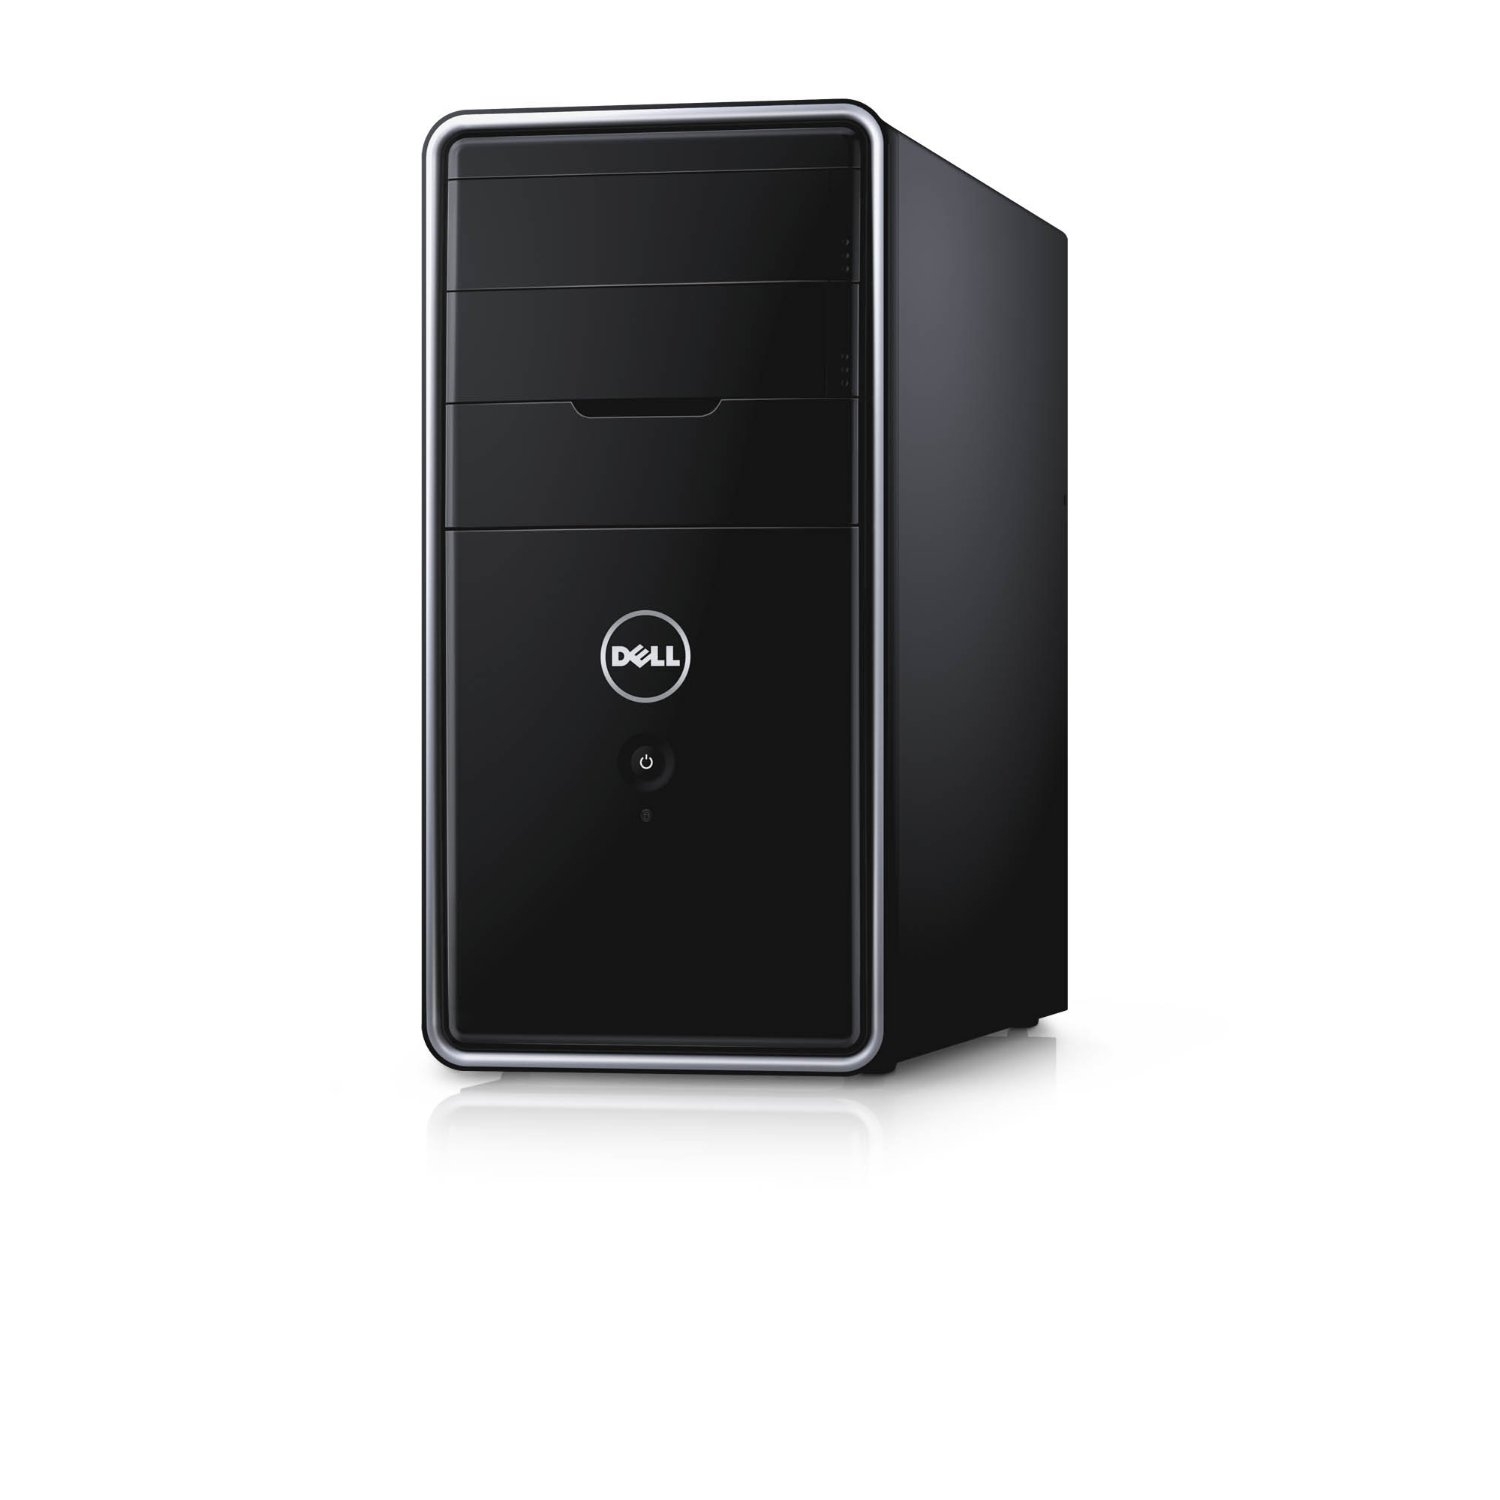 Dell INSPIRON3847DES41SD   Inspiron 3847 Intel Core i5-4460 X4 3.2GHz 8GB 1TB DVD+/-RW (Scratch and Dent)